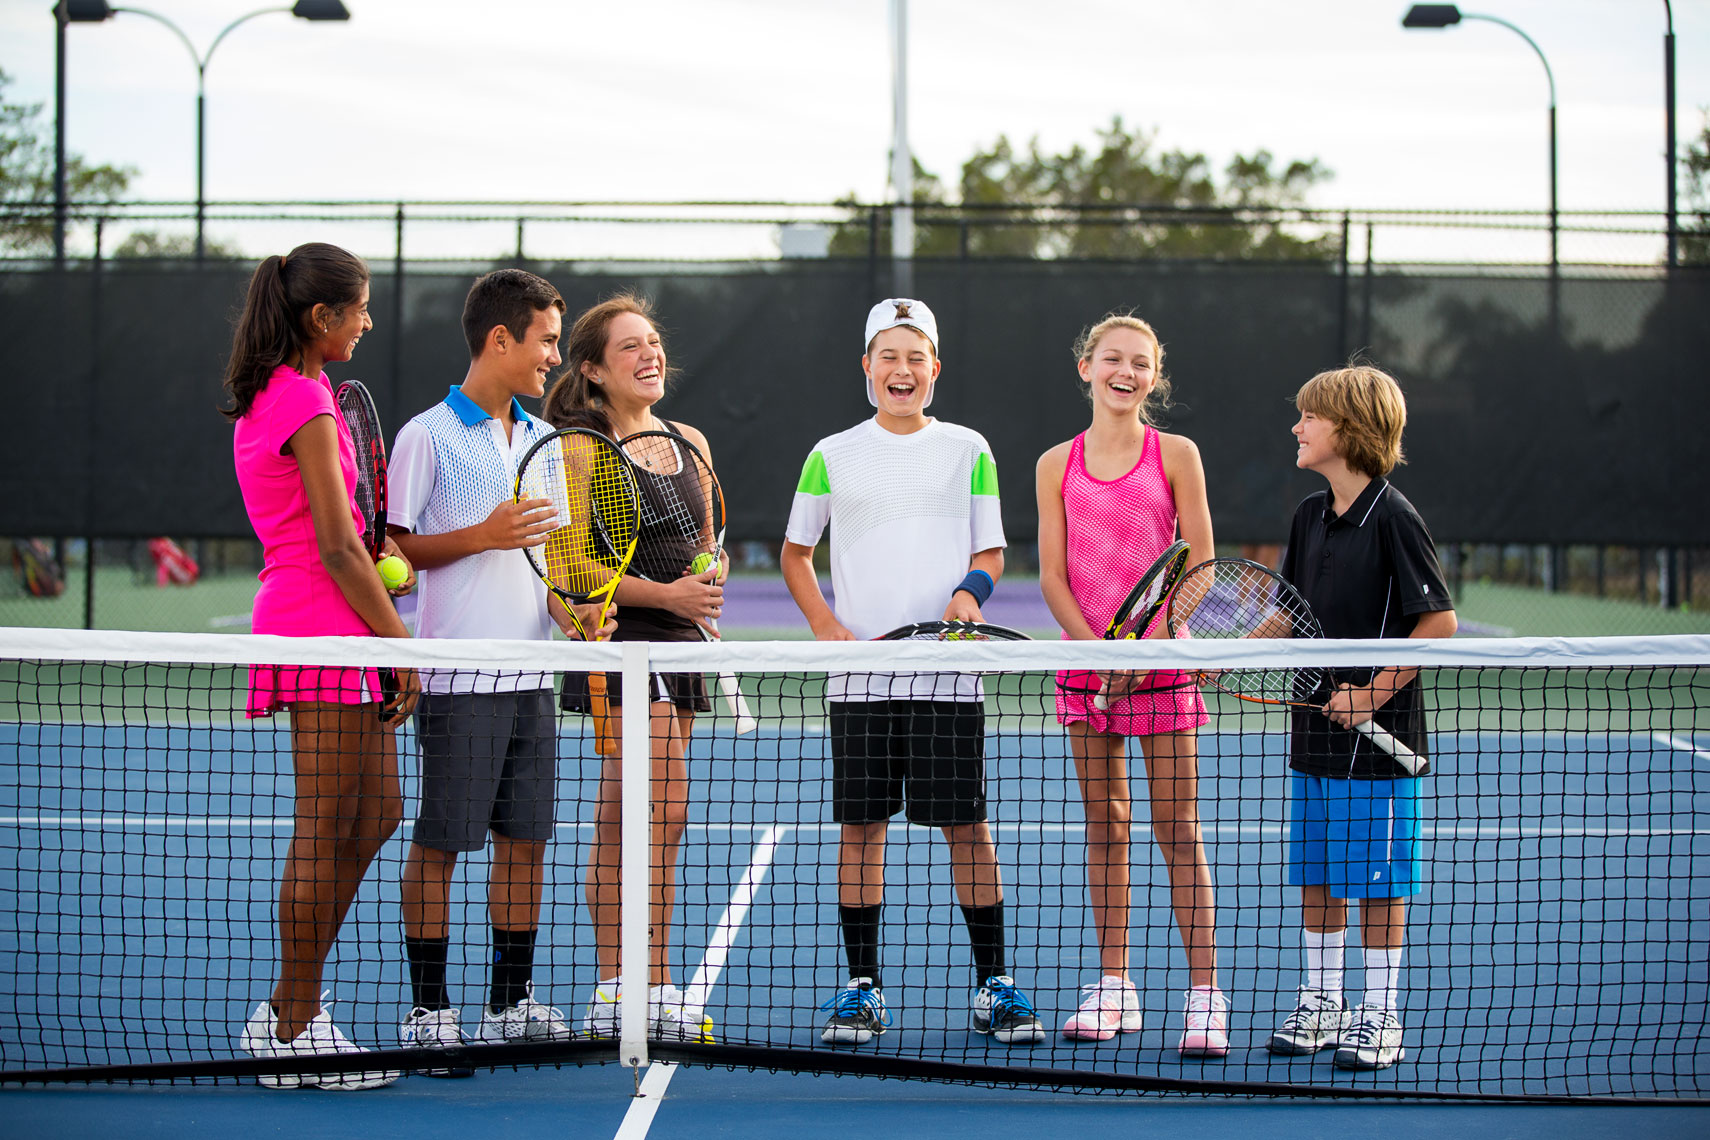 southern_california_commercial_sports_photographer_princetennis_263